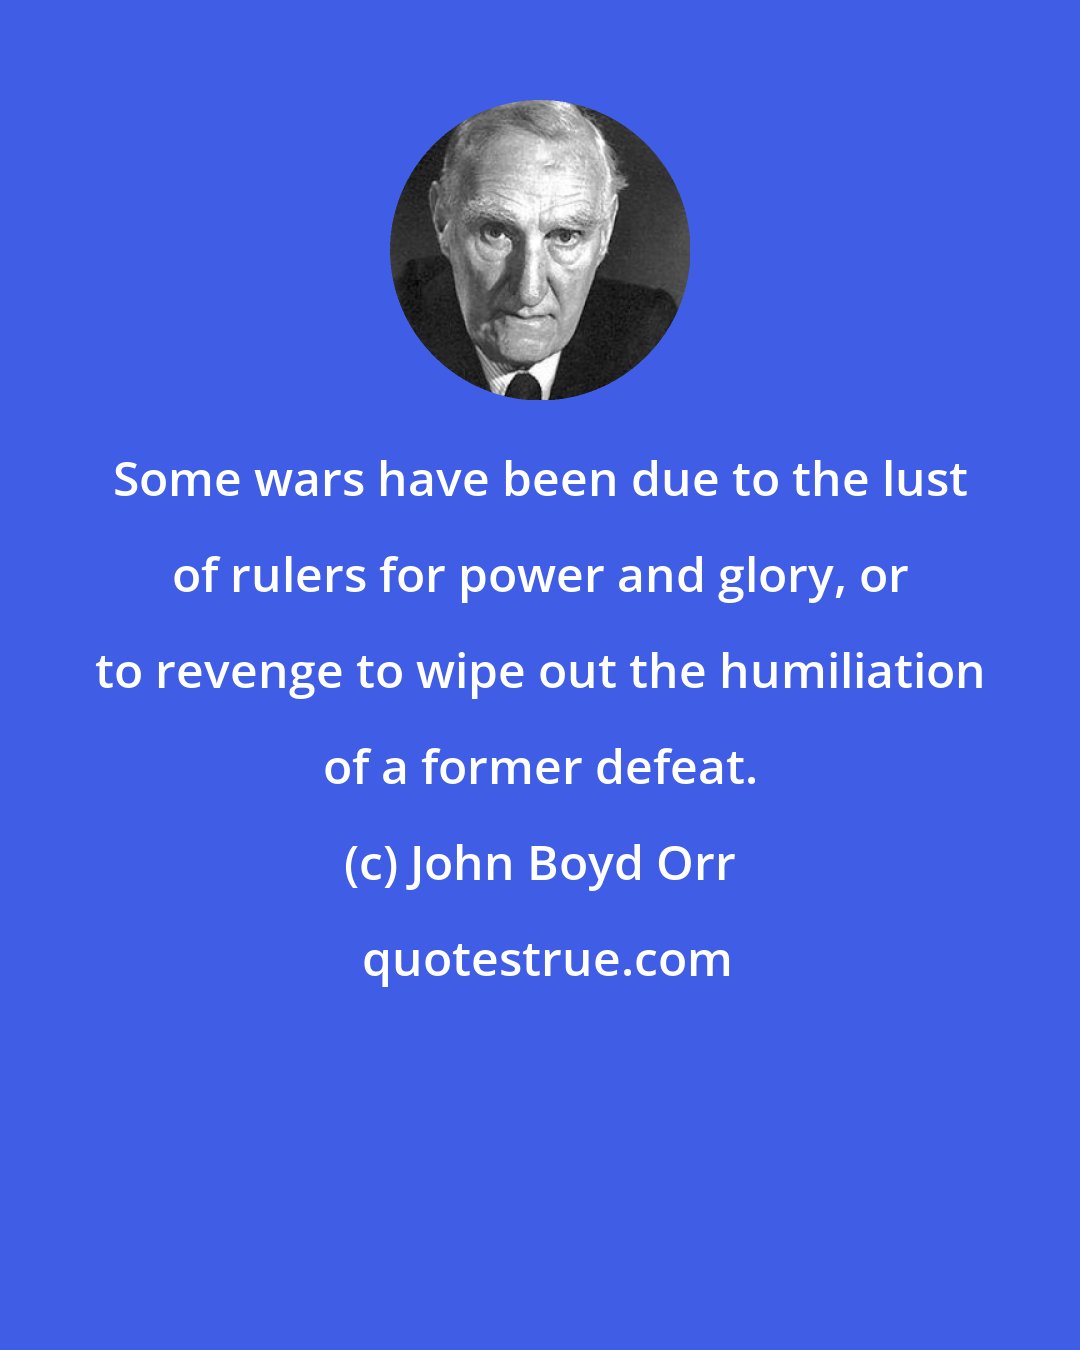 John Boyd Orr: Some wars have been due to the lust of rulers for power and glory, or to revenge to wipe out the humiliation of a former defeat.